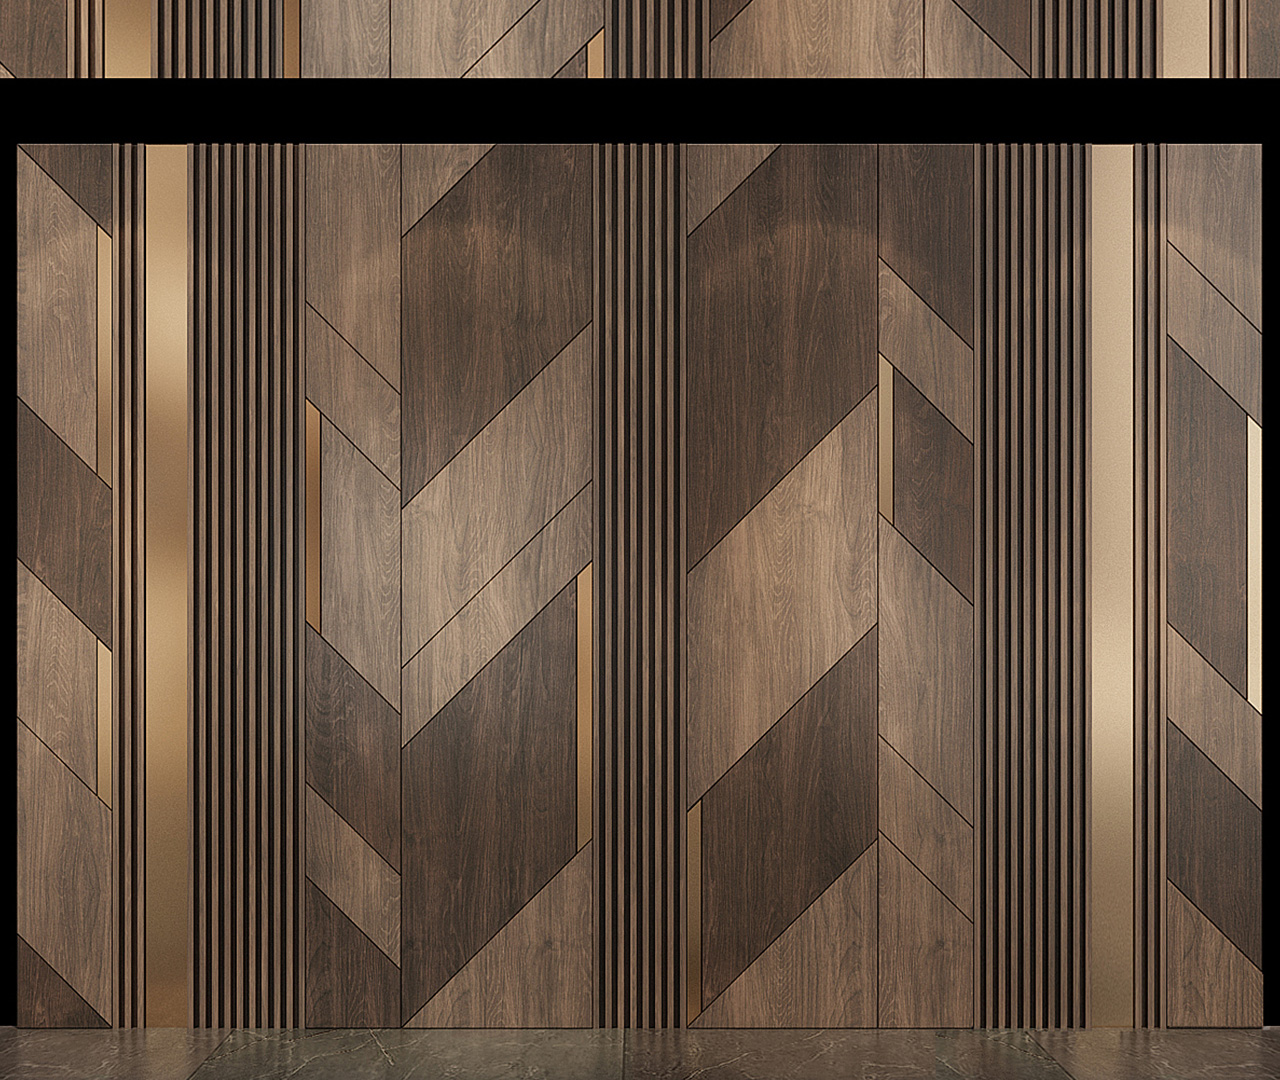 BOLD Wood and Stainless Steel Wall Cladding